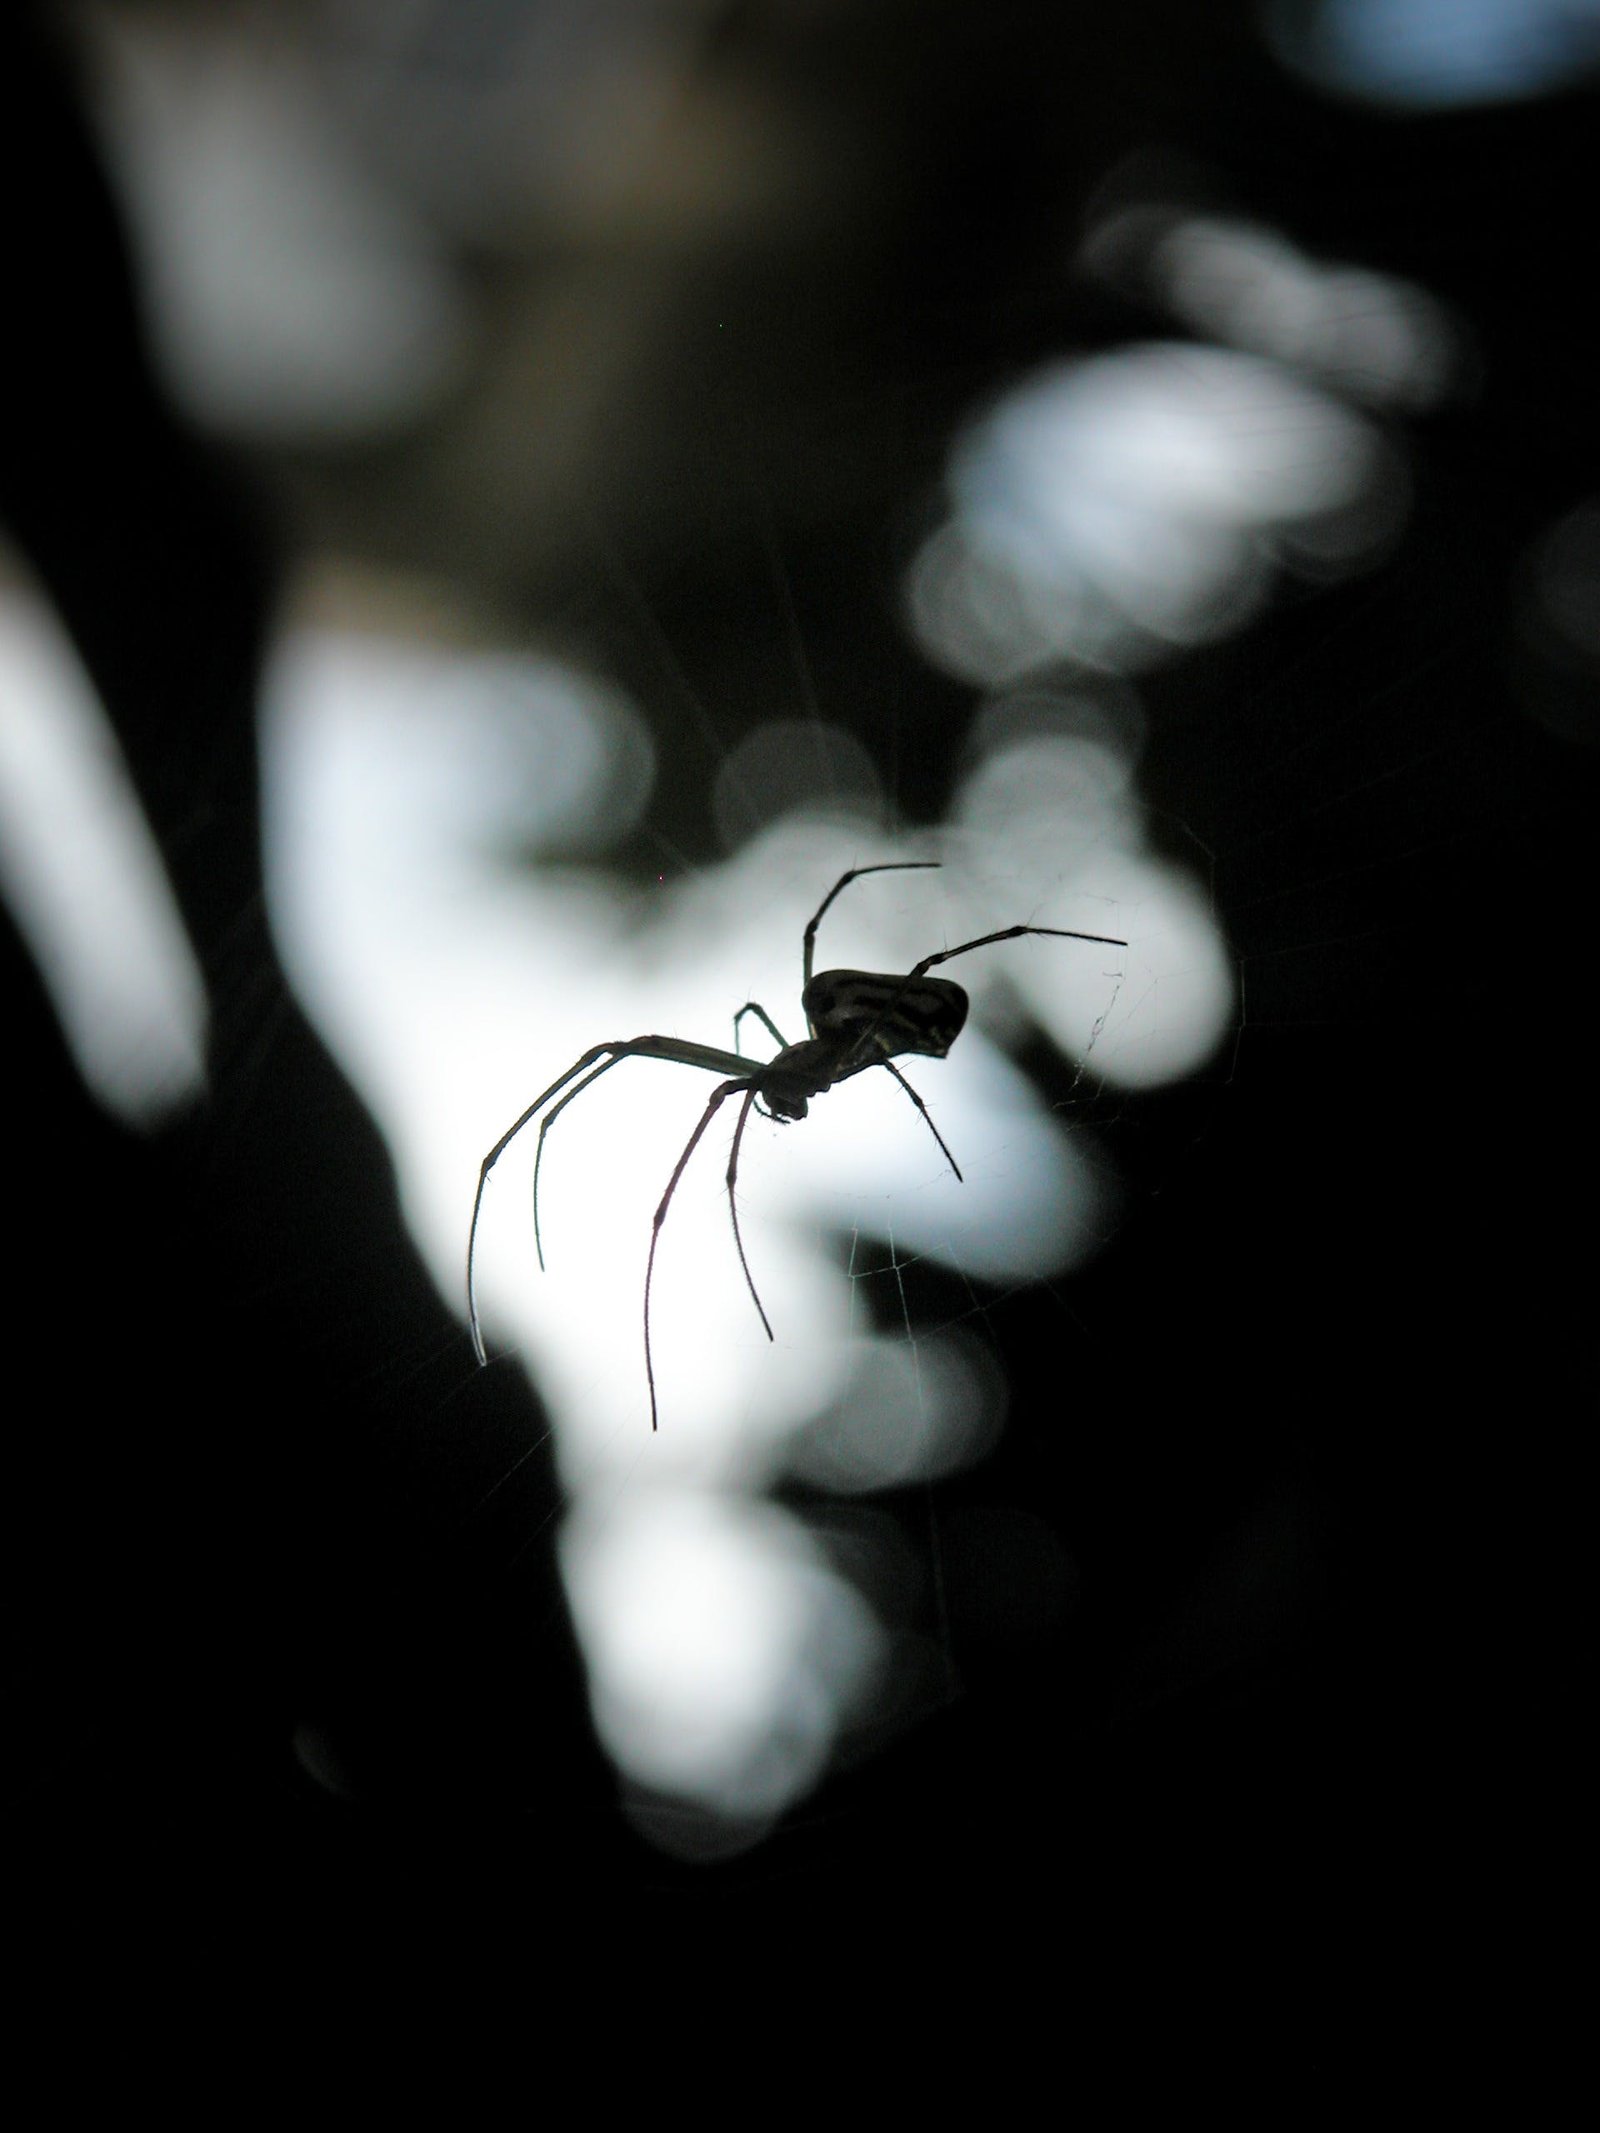 How Do You Handle And Care For The Elusive Assassin Spider Known For Its Stealthy Hunting Tactics?